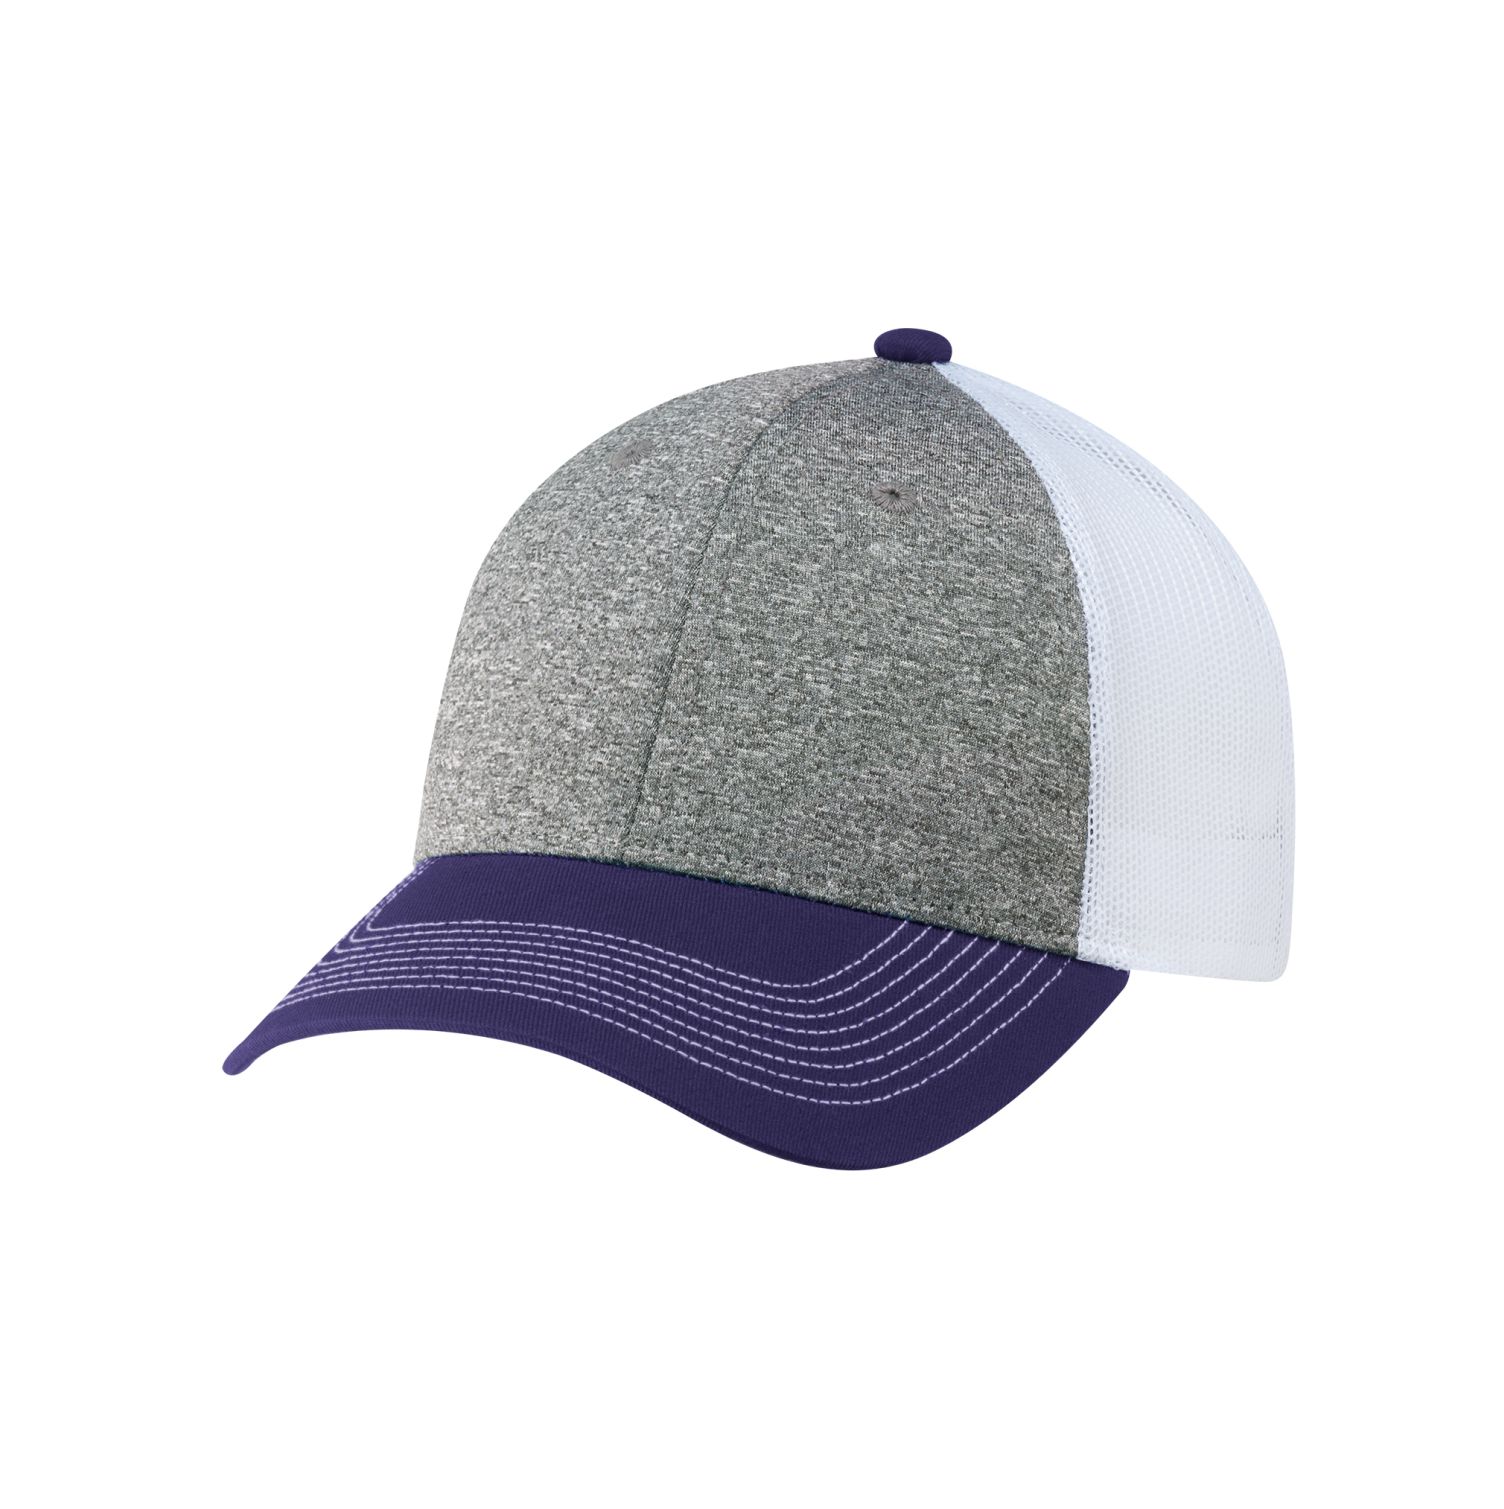 AJM Cotton Drill / Polyester Heather / Nylon Mesh 6 Panel Constructed Full-Fit Hat (Mesh Back) #4G645M Purple / Charcoal / White